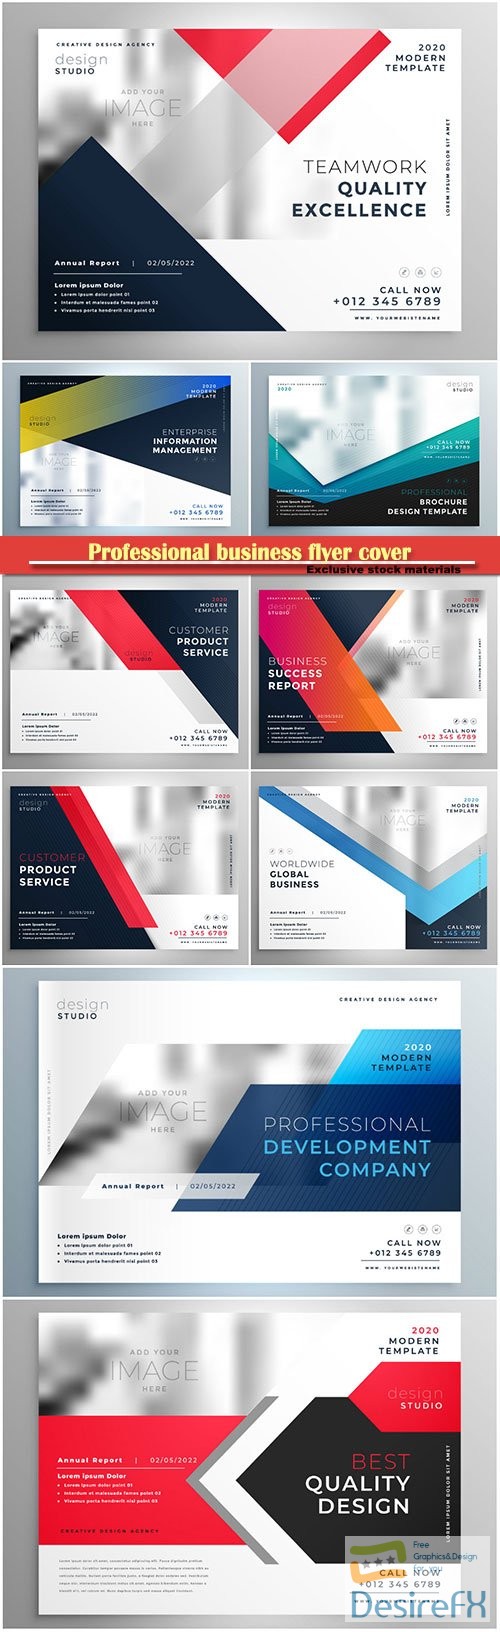 Professional business flyer cover vector template